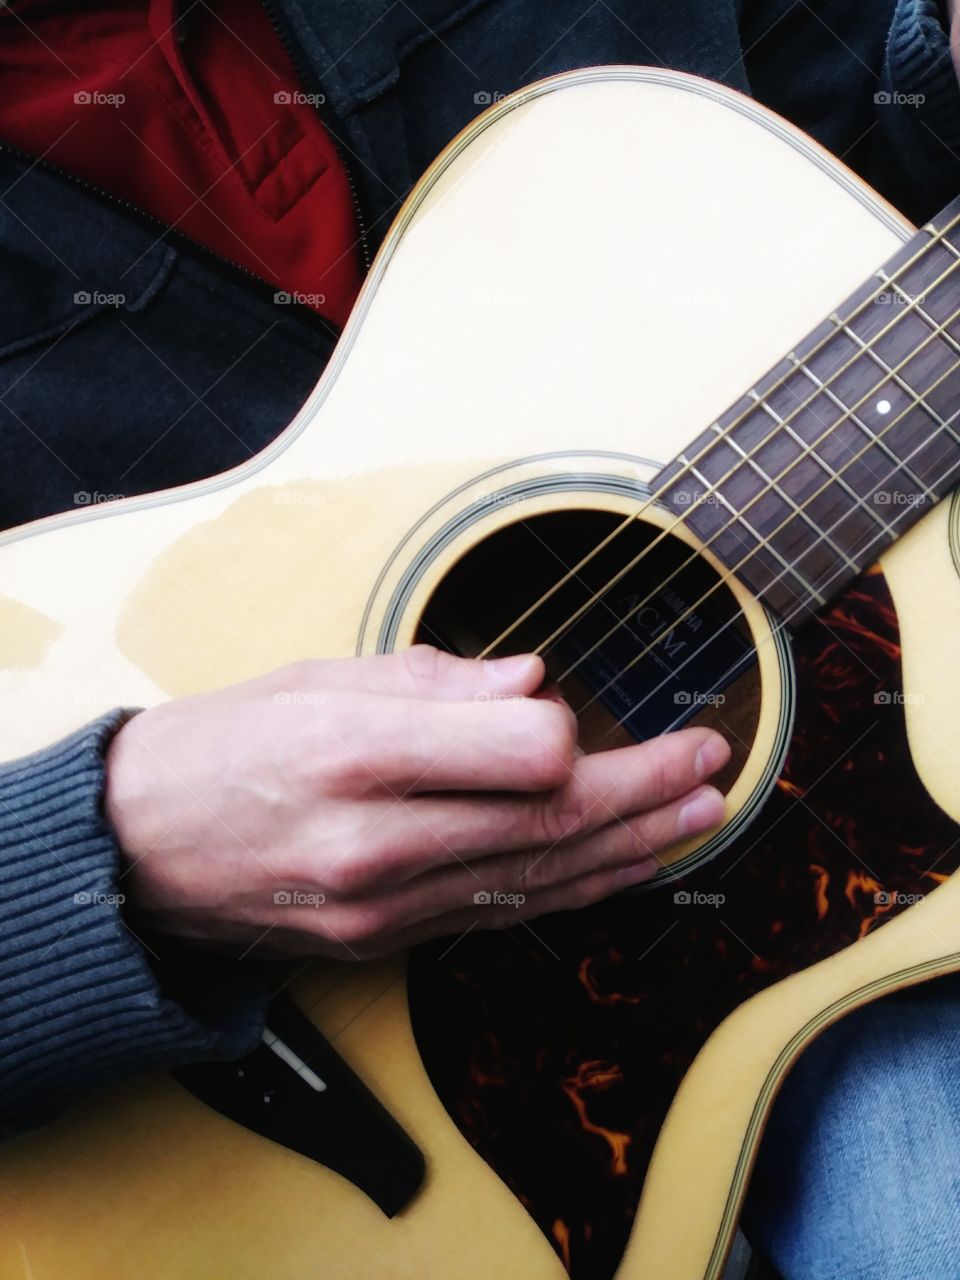 Acoustic guitar player -close-up